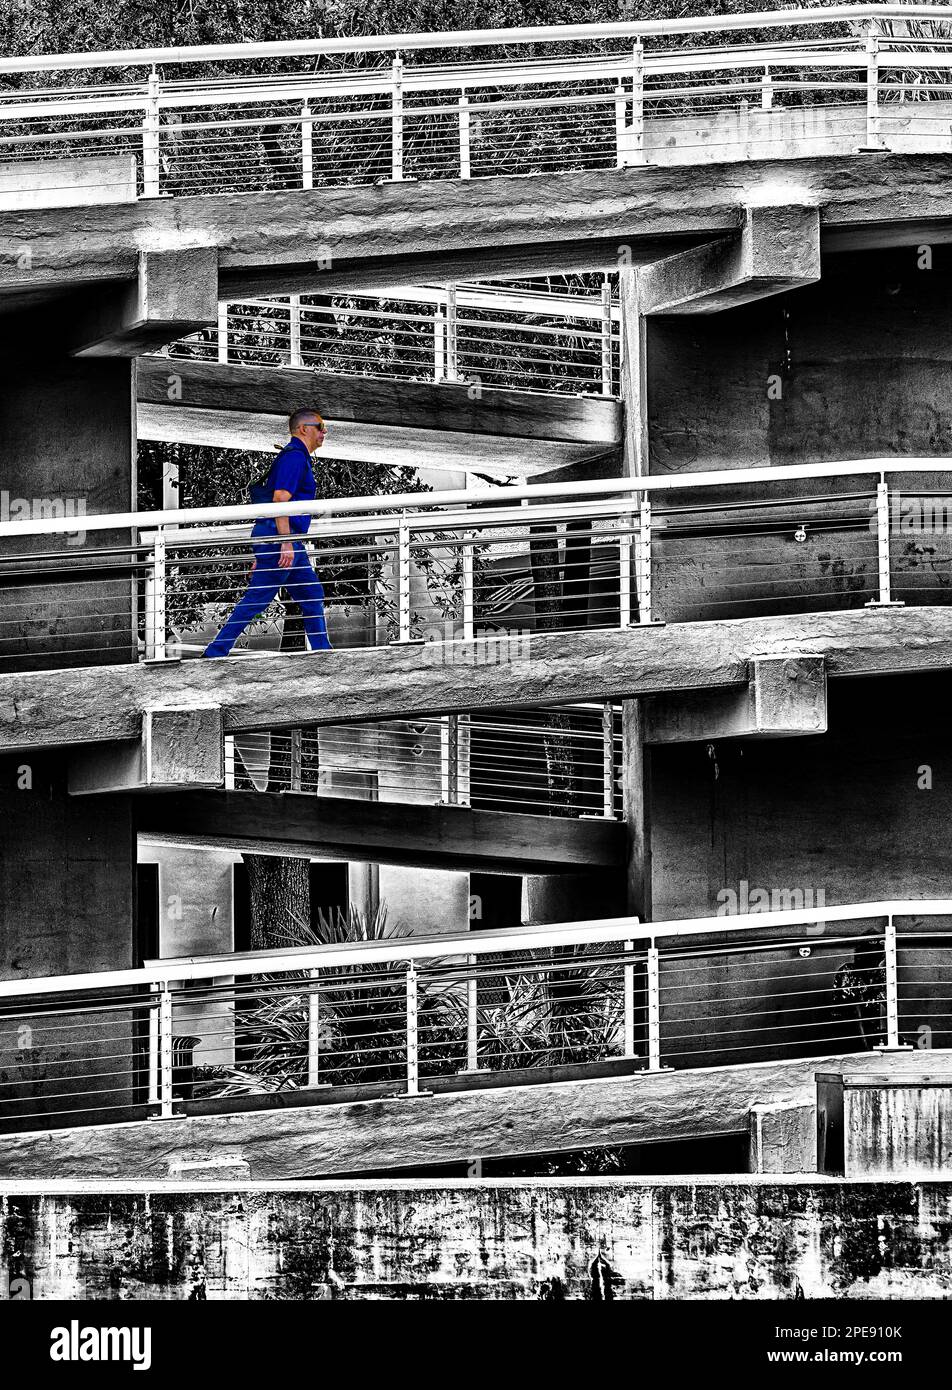 Pedestrian on the Zigzagging ADA access Ramp to the Andrews Avenue Bascule Bridge in the Riverwalk area of downtown Fort Lauderdale Stock Photo